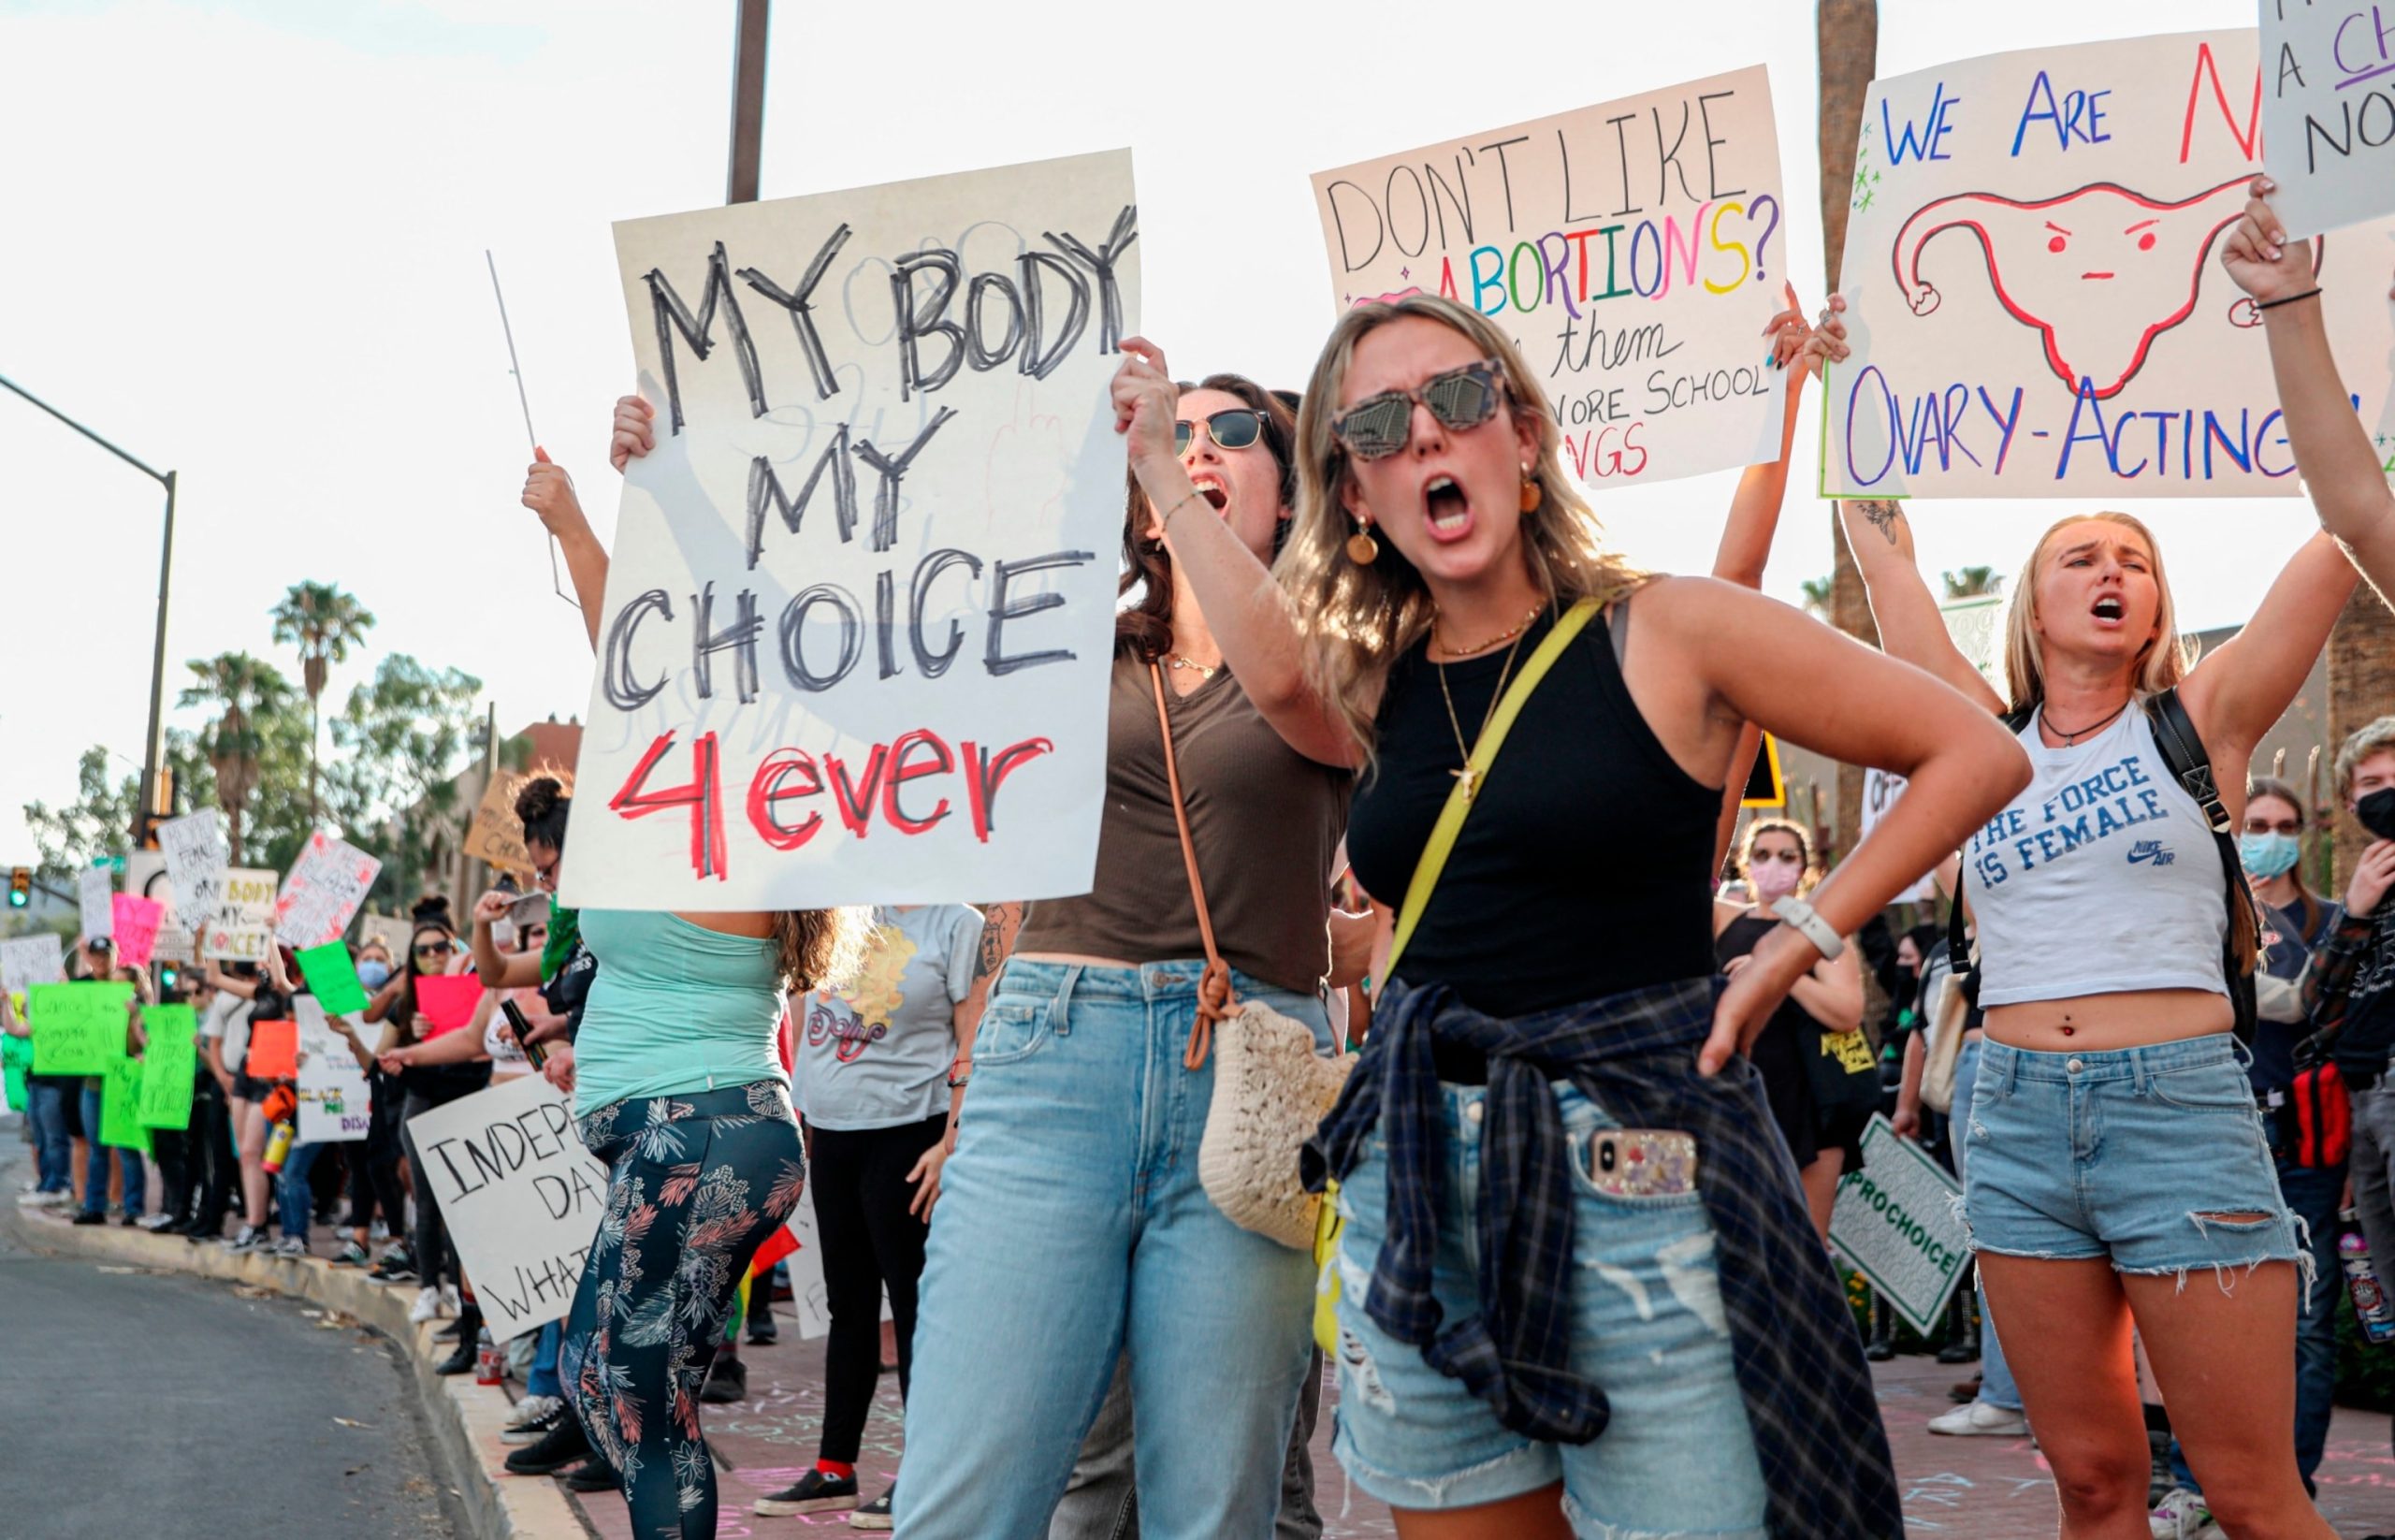 Key Information about Arizona's Centuries-Old Near-Total Abortion Ban as it Advances to the State's Supreme Court